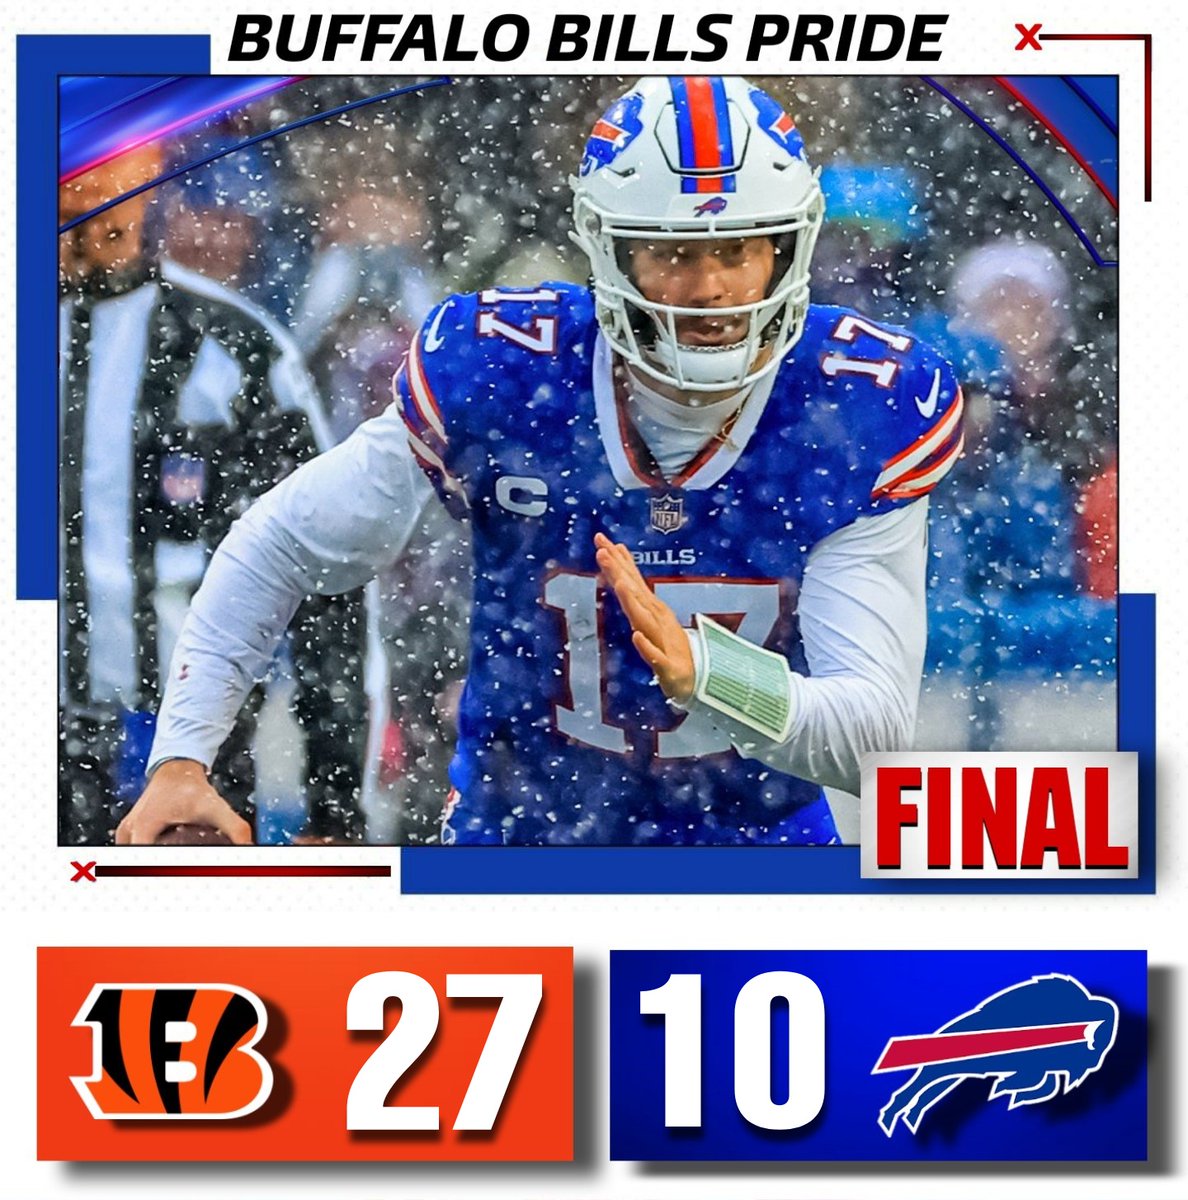 The Buffalo Bills are defeated by the Cincinnati Bengals 27-10. 

In the words of #BillsMafia, 'there's always next year '

#CINvsBUF #AnotherDisappointedSeason